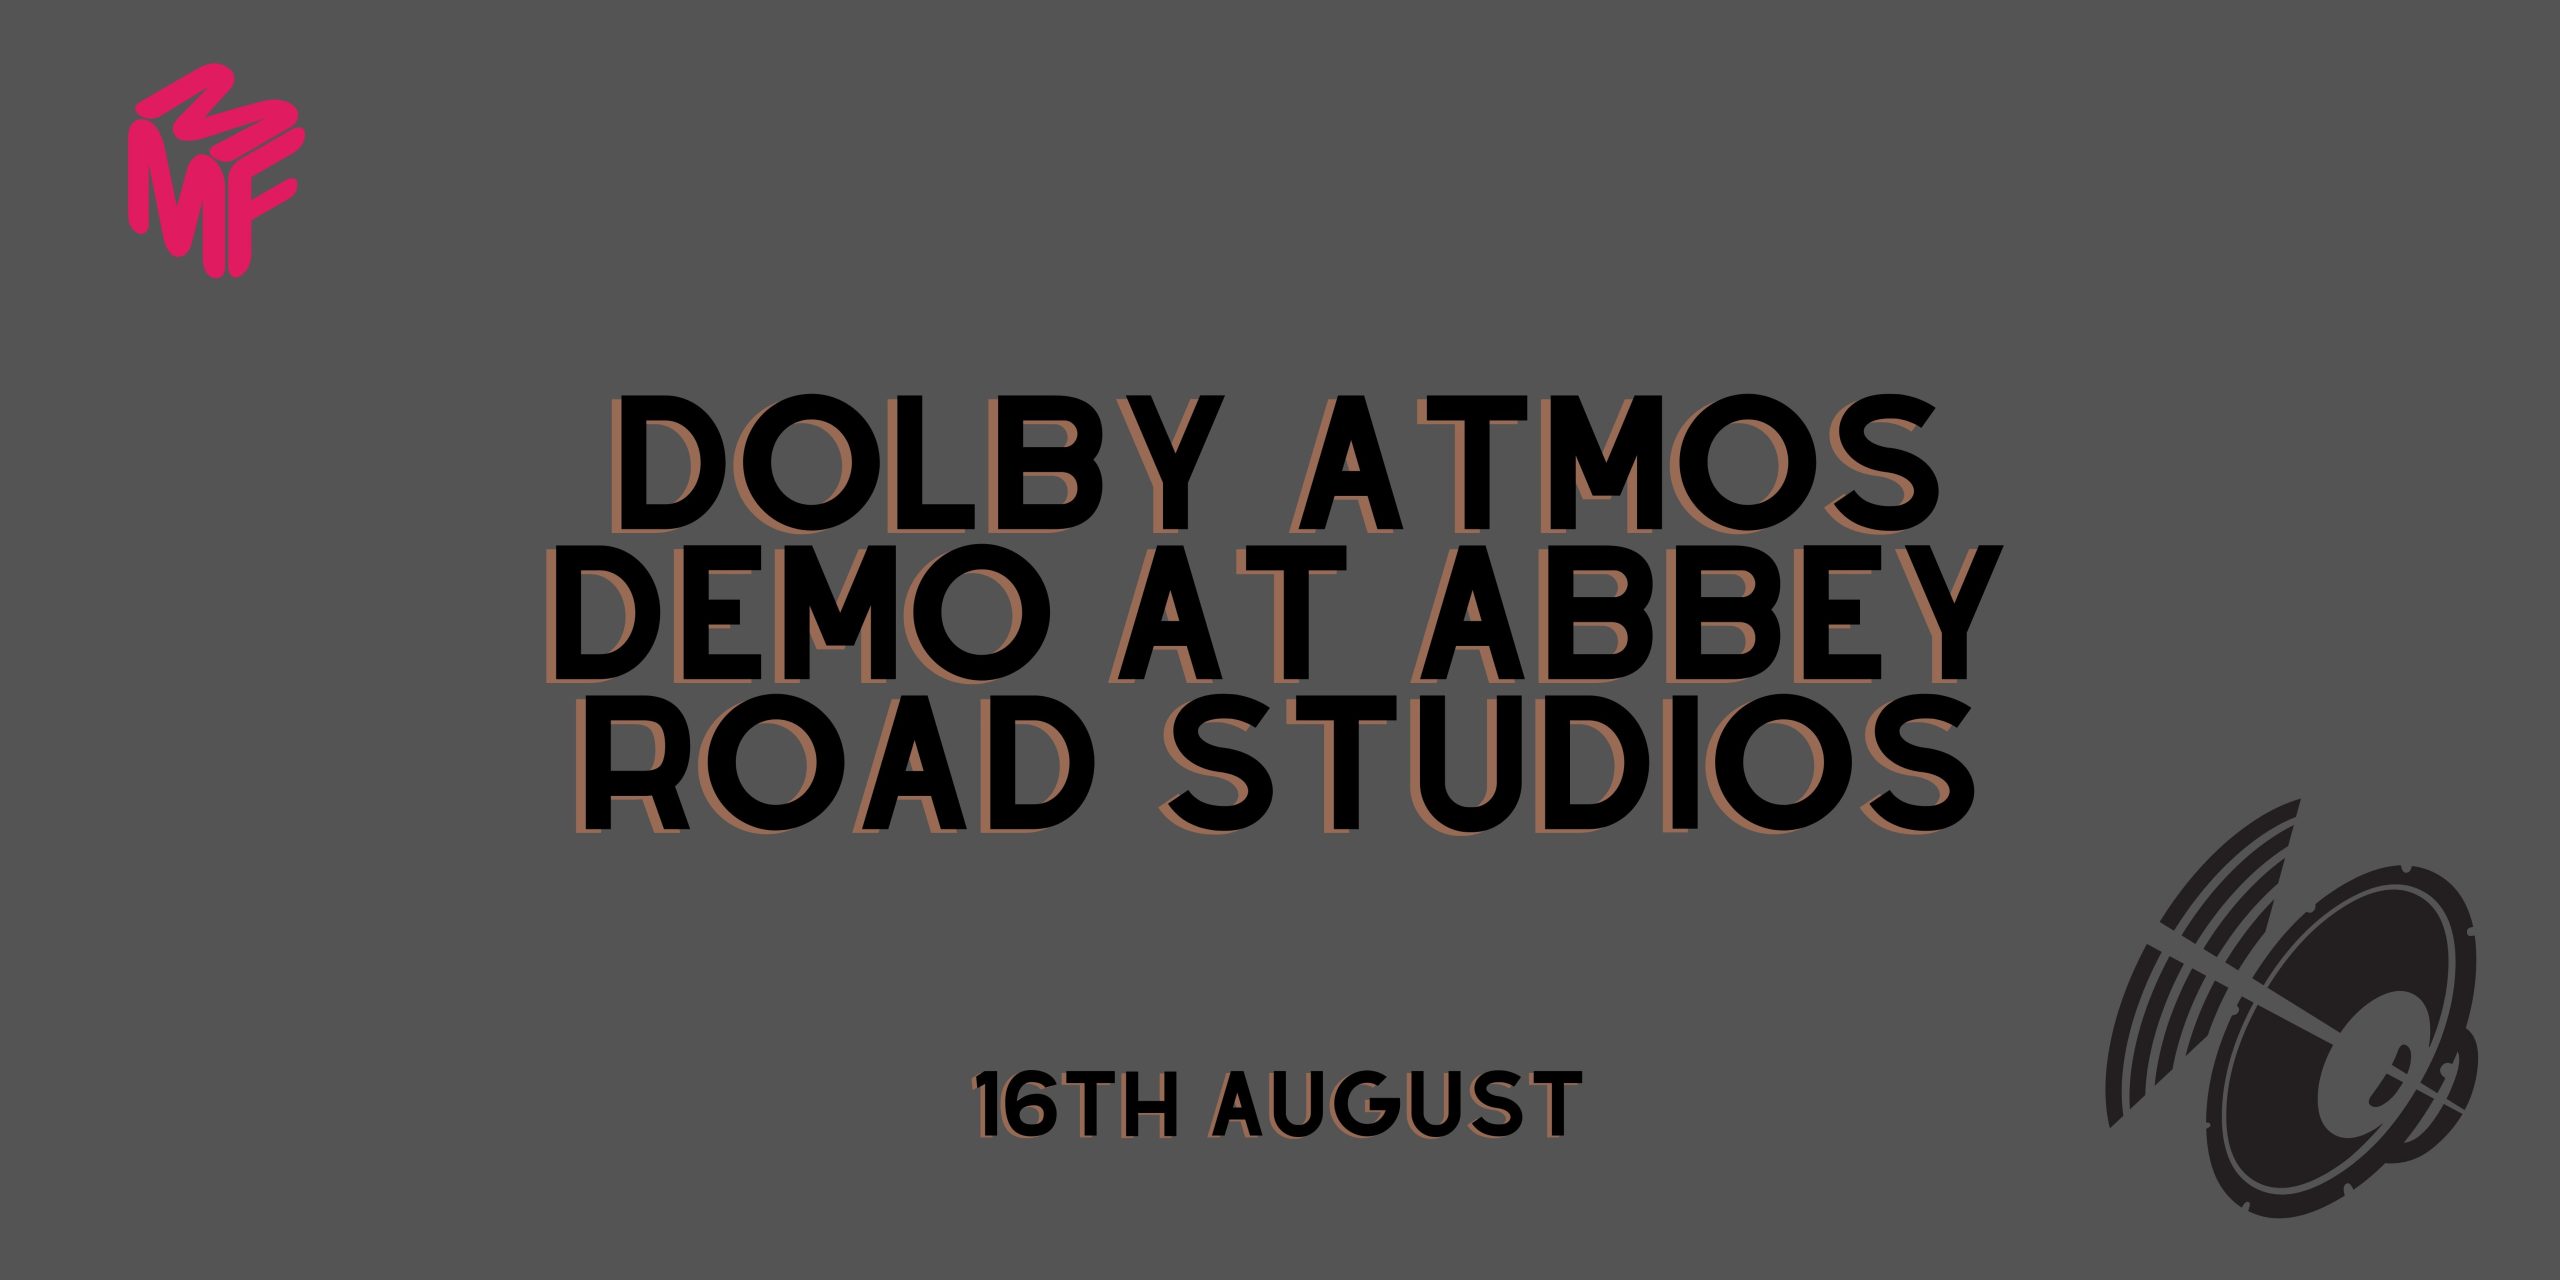 Dolby Atmos Demo at Abbey Road Studios